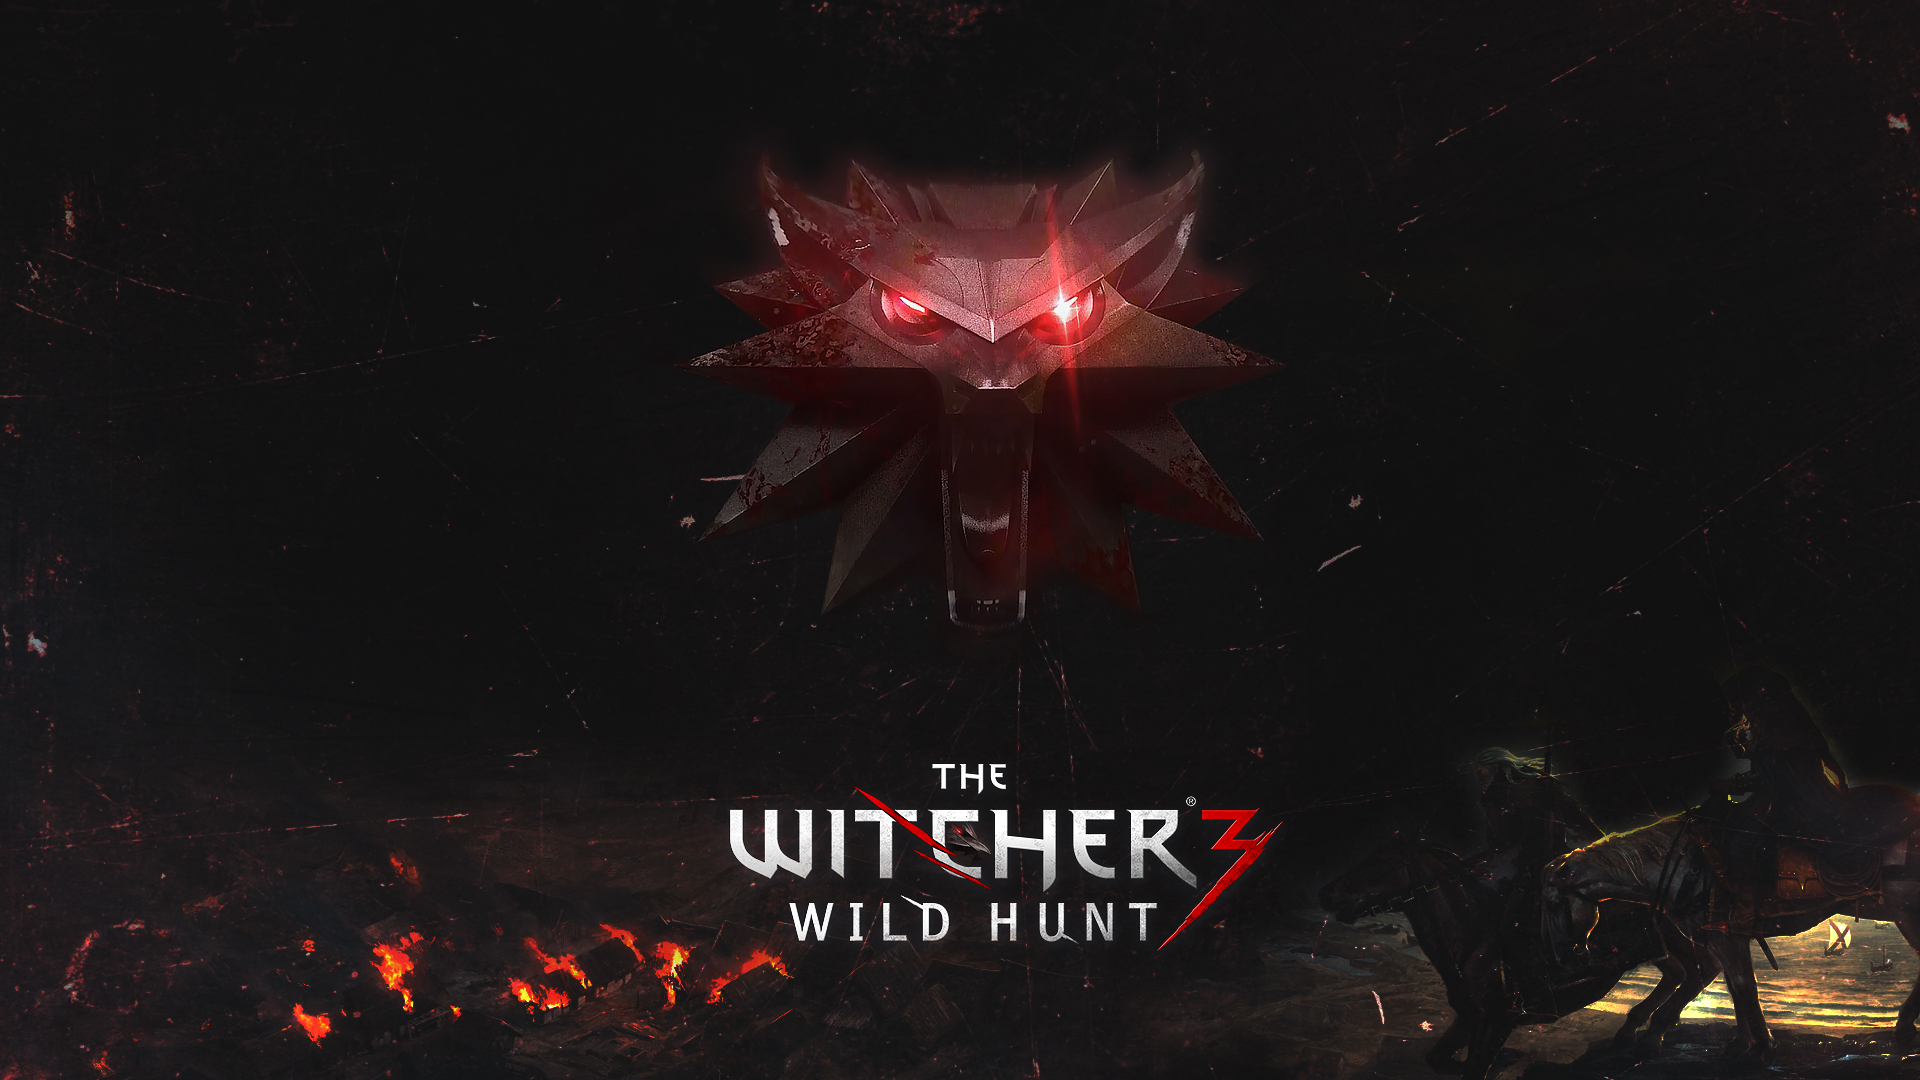 The Witcher 3 wallpaper 2